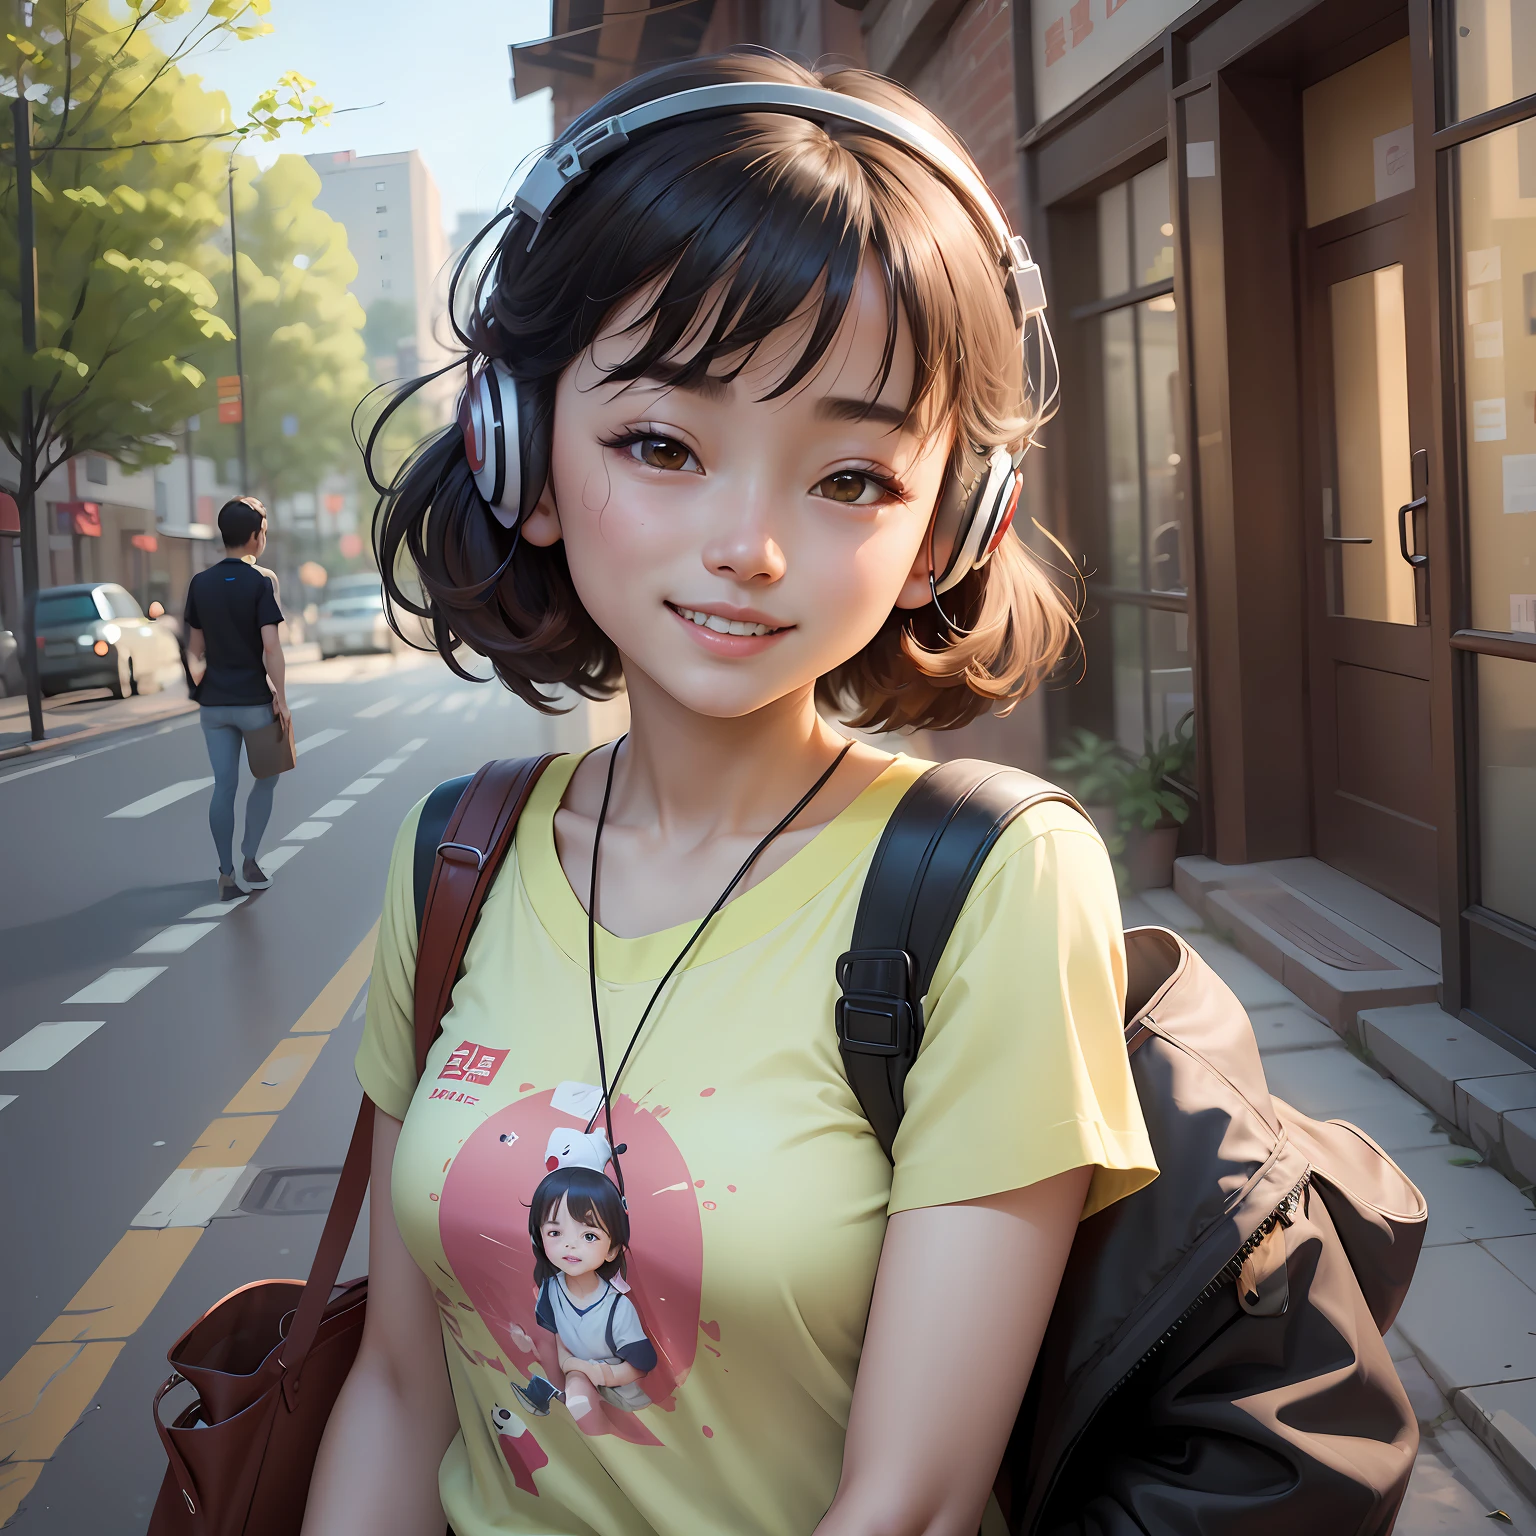 There is a woman wearing headphones, Chen Xintong, young and cute Wan Ya face, Liu Chengyou, Wan cute Korean face, broad forehead, Chiho, young and cute Korean face, Wu Xisen, Ye Wenfei, Chinese girl, Asian face, Ruan Meng cute vtuber, gongbi, Yunling, Lin Qifeng, anime sense, oil painting style, fair skin, toothy smile, cute, college student, gentle, quiet --auto --s2